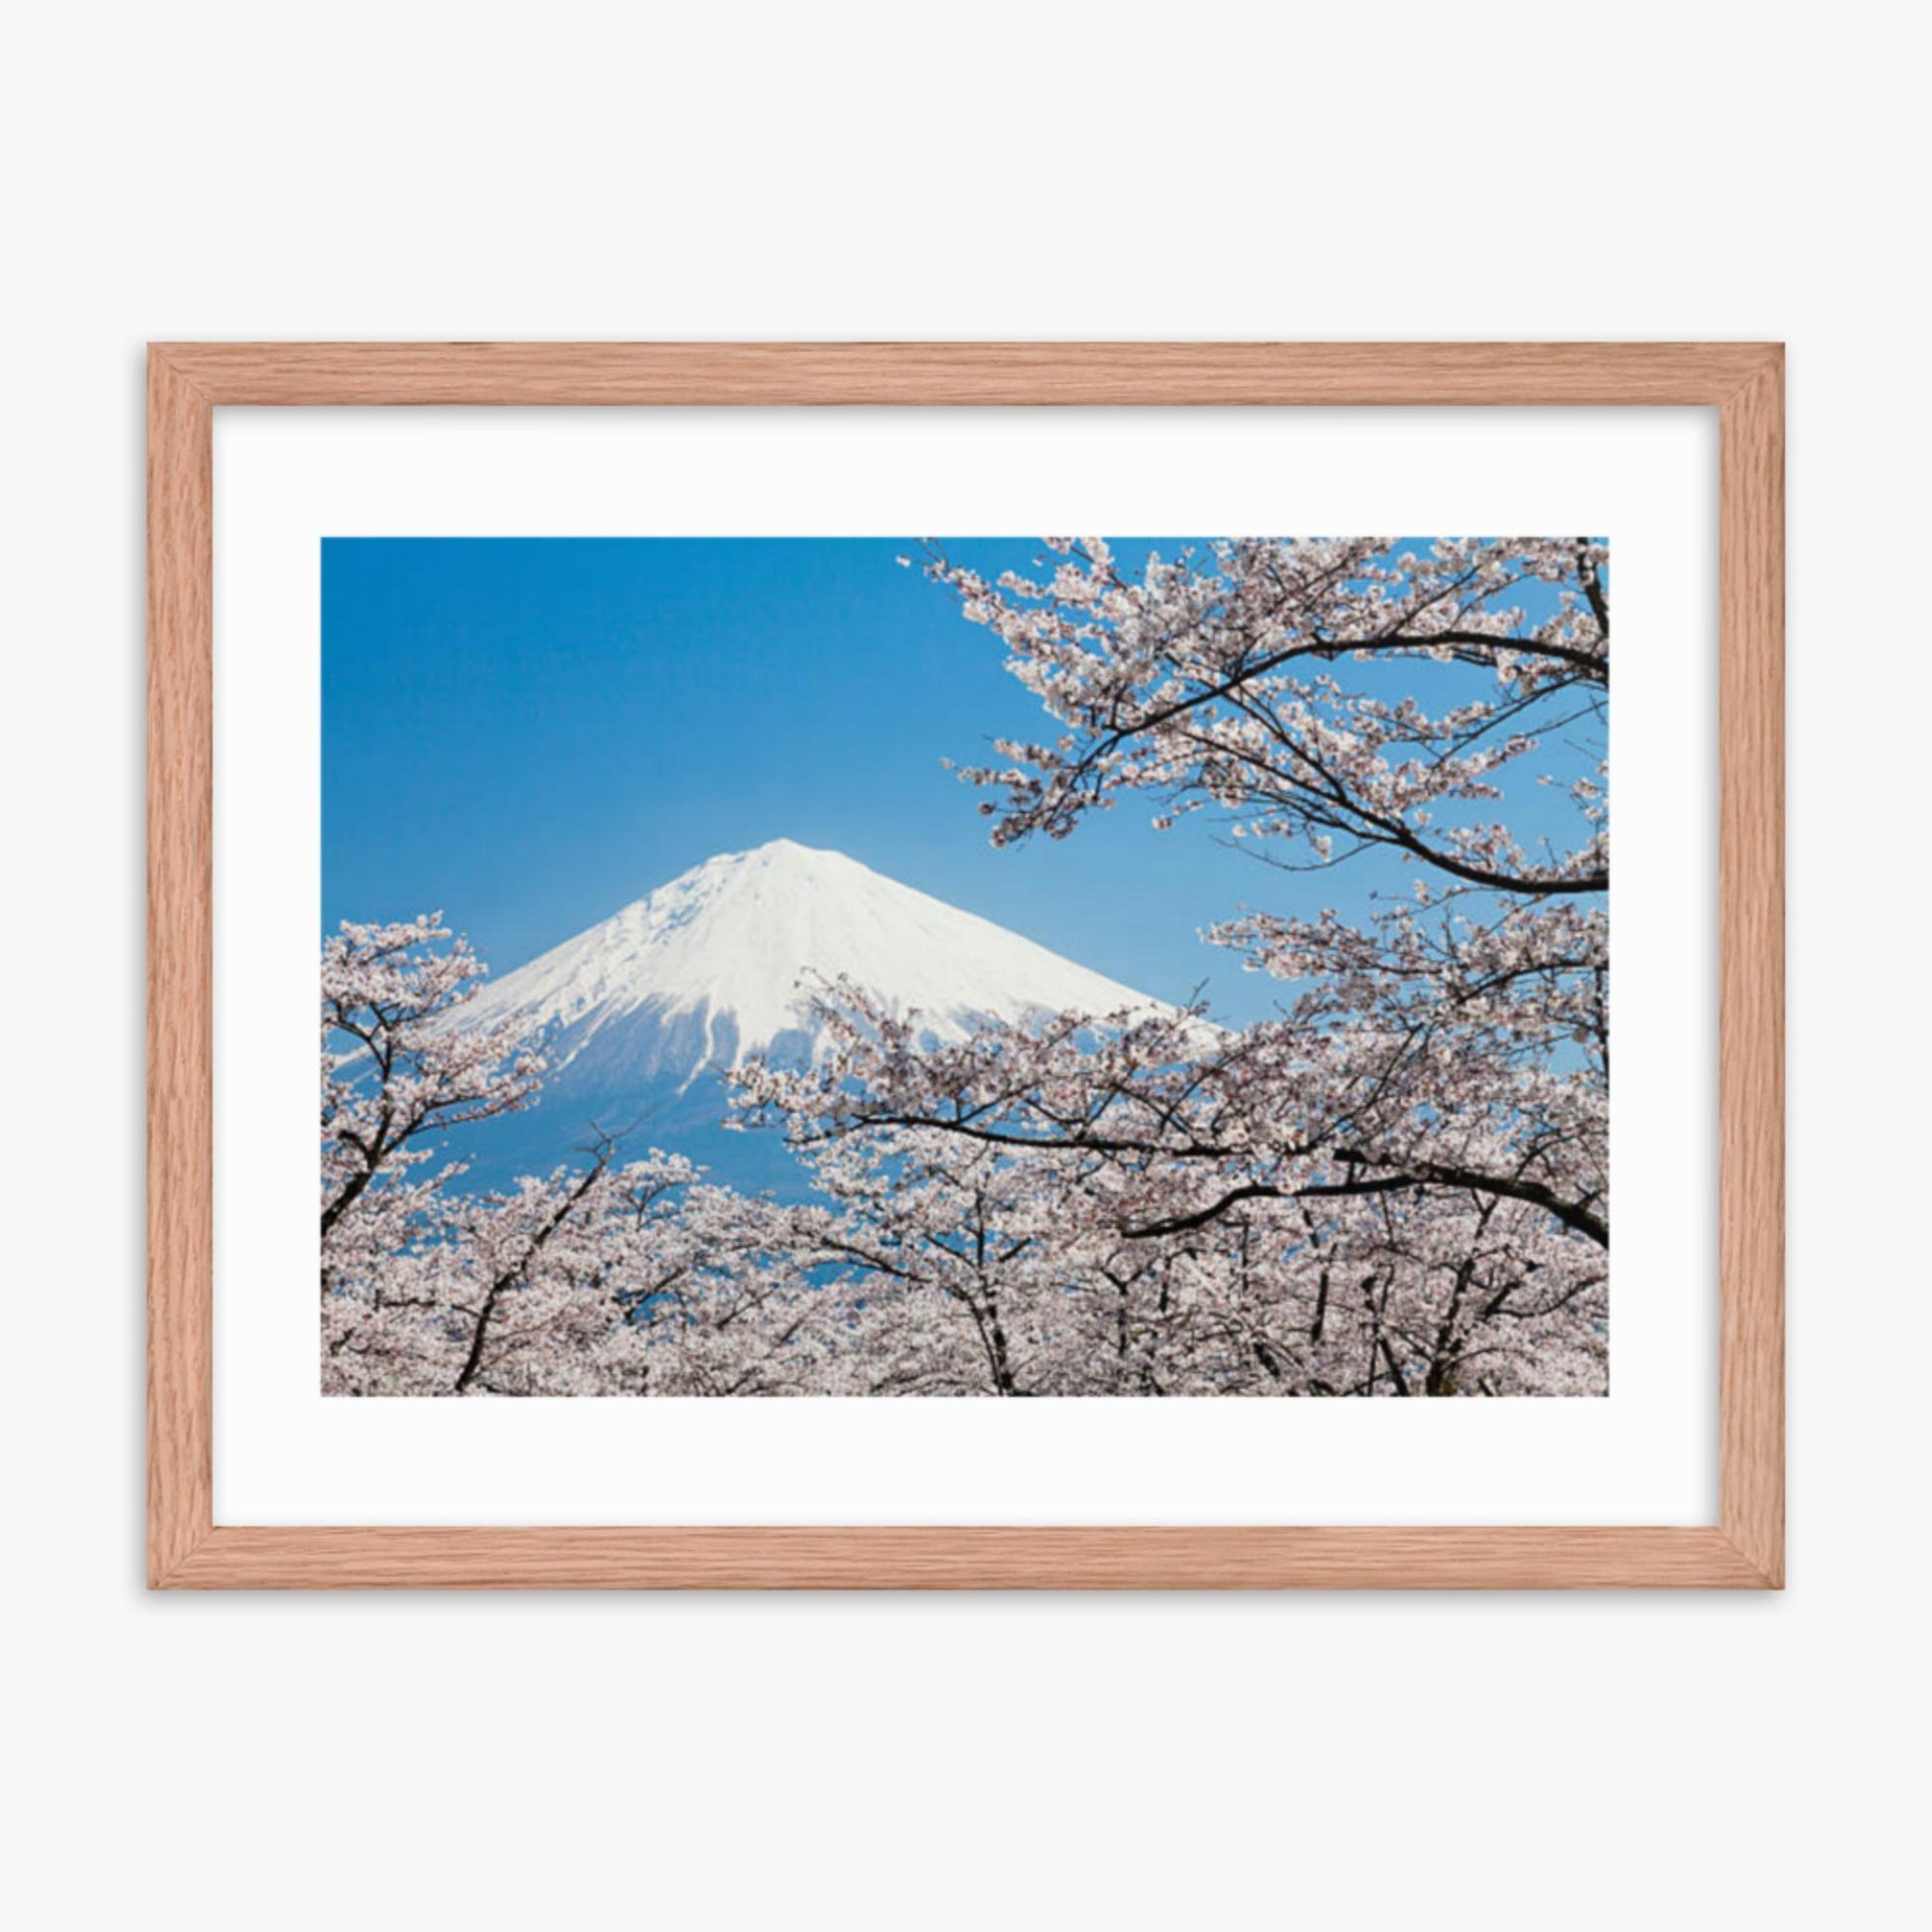 Mount Fuji & Cherry Blossoms 18x24 in Poster With Oak Frame